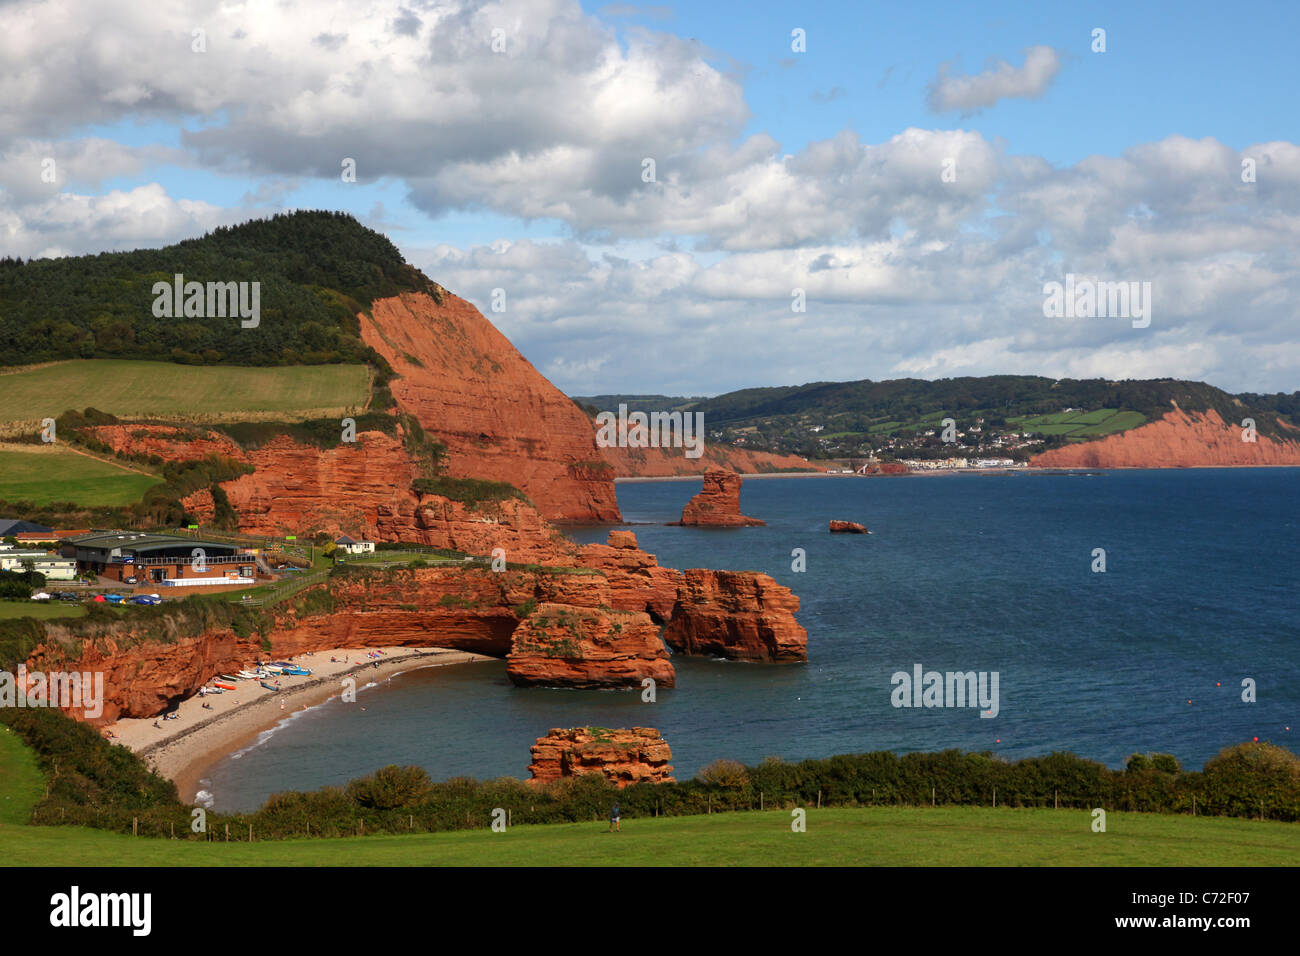 View overlooking Ladram Bay and Sidmouth, Devon Stock Photo